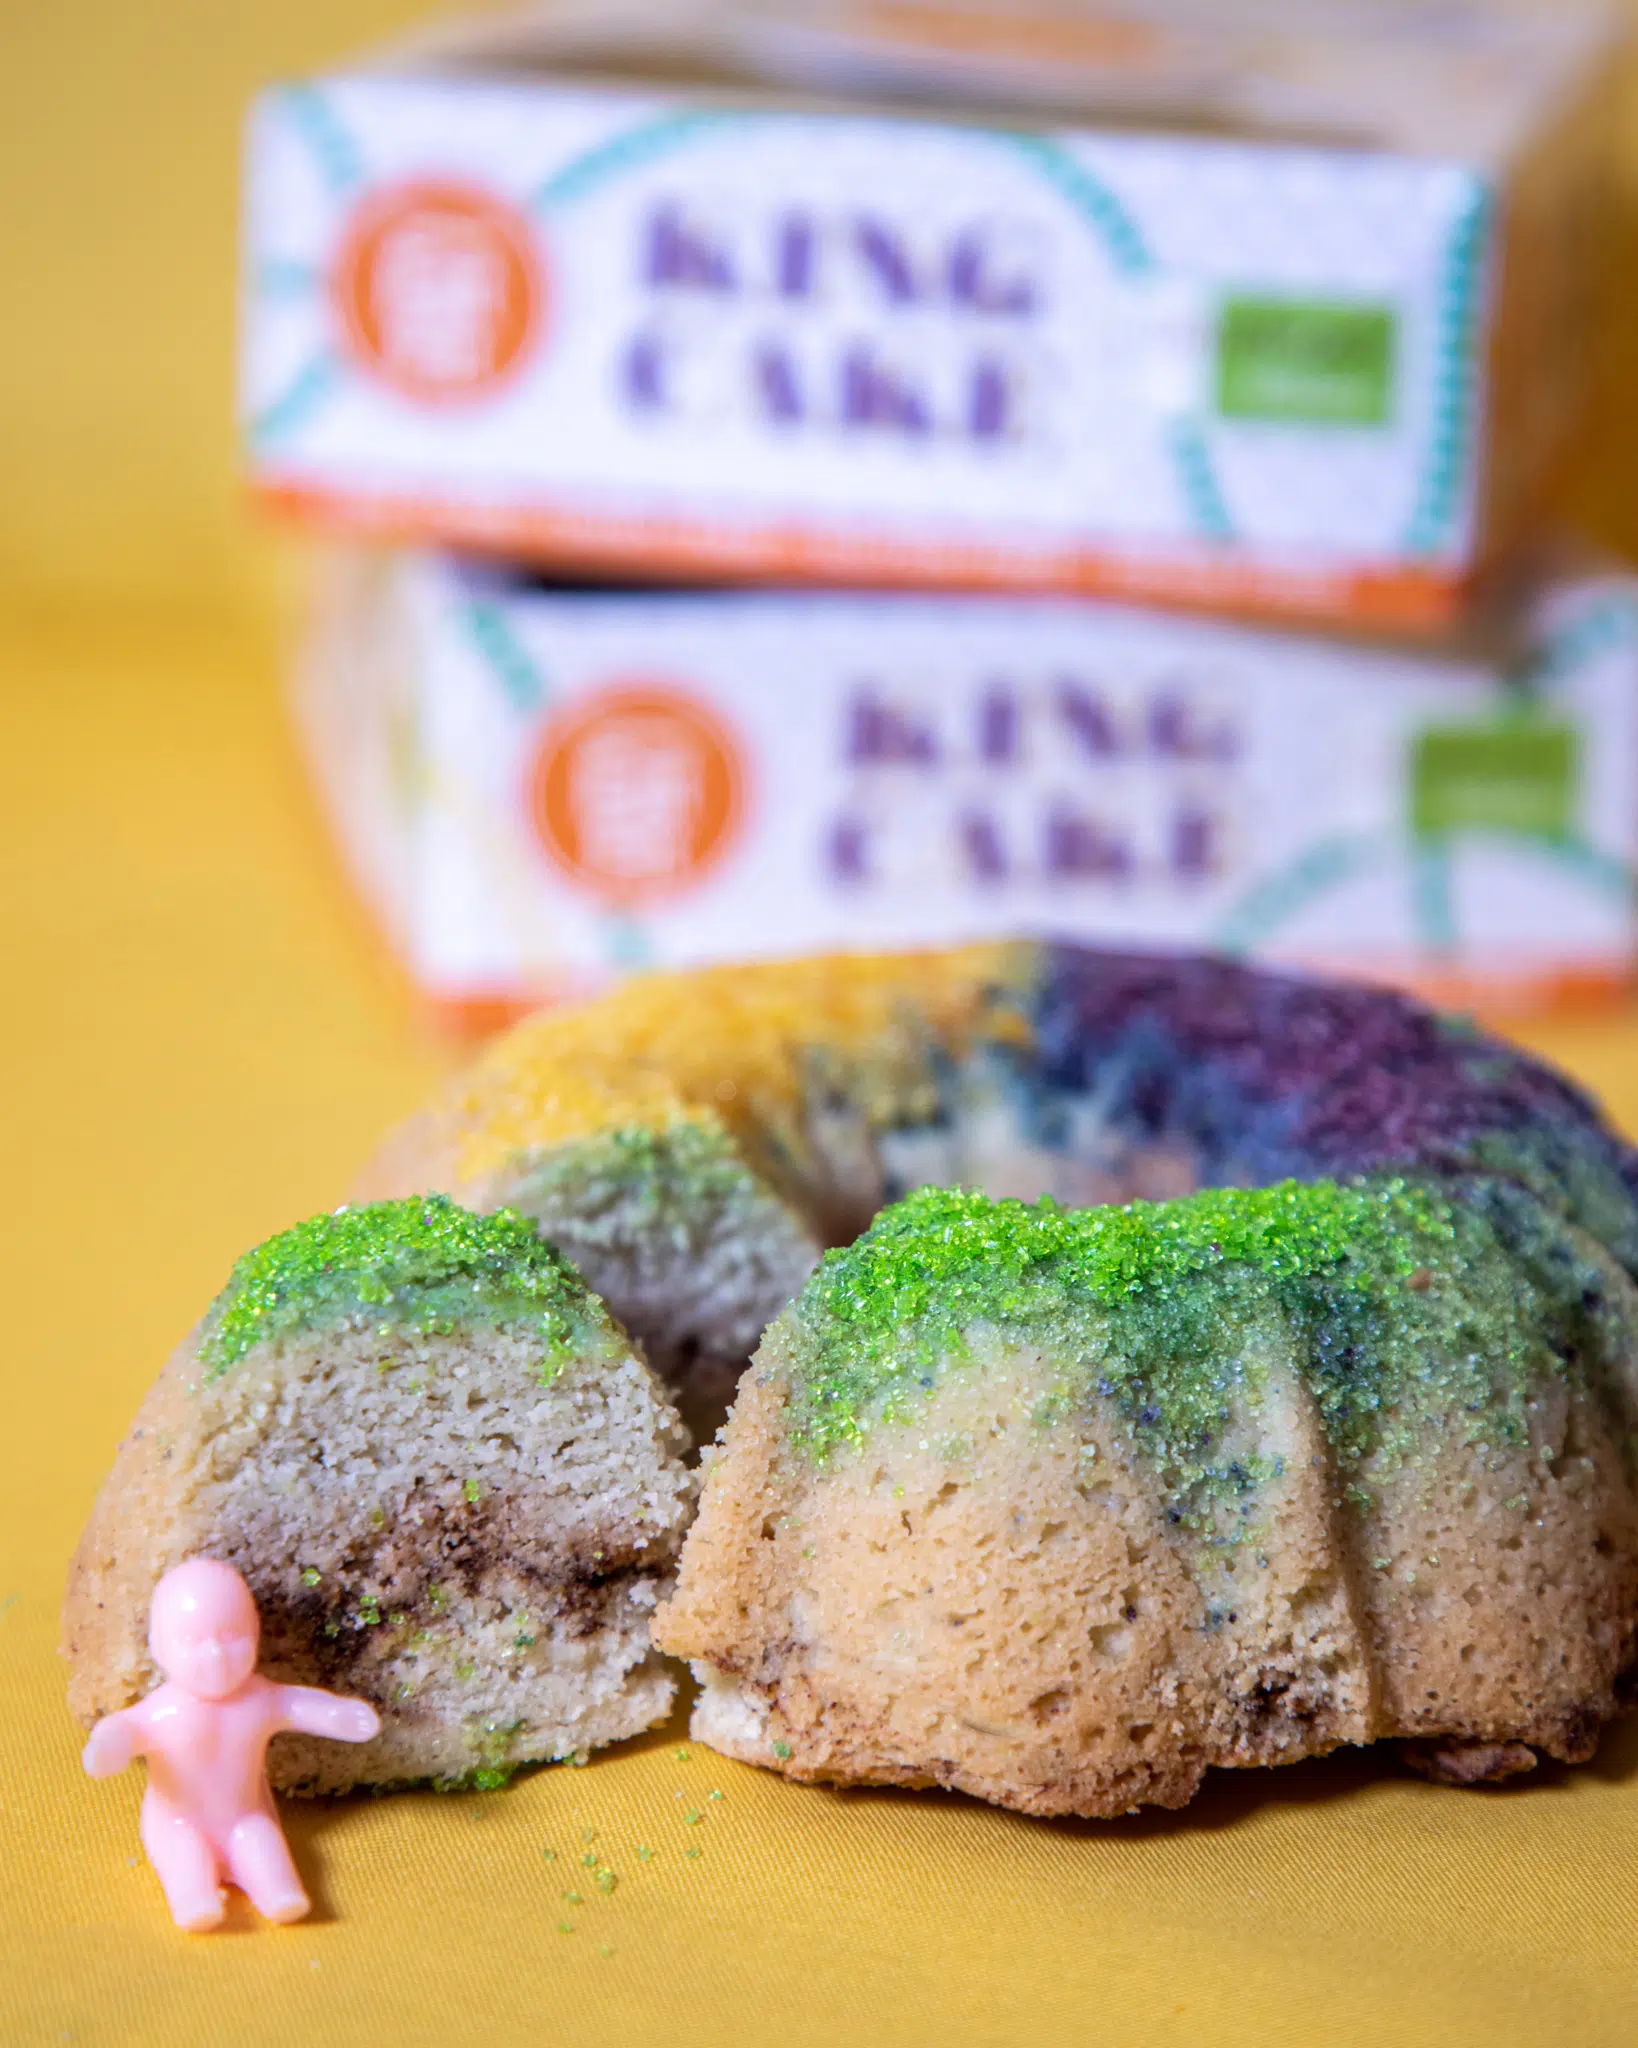 Ochsner Eat Fit announces signature king cakes before the kickoff of carnival